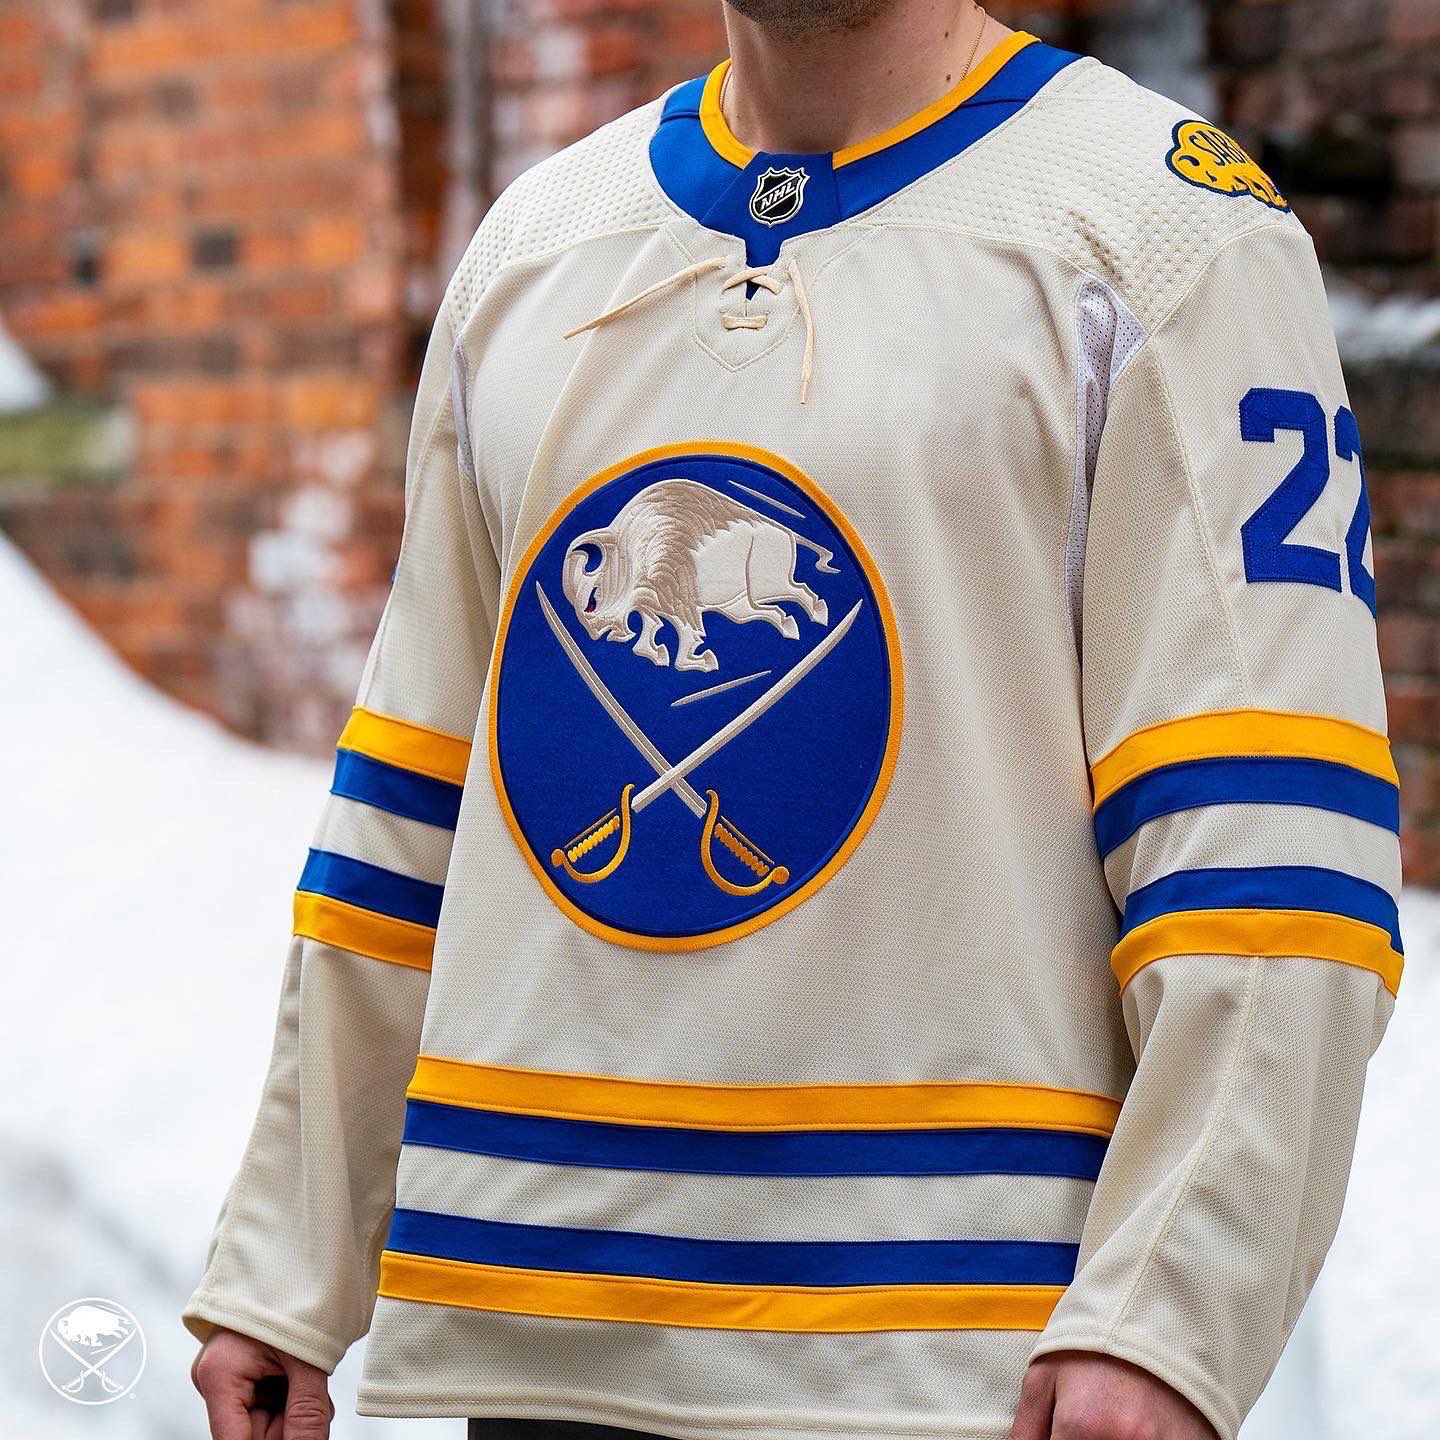 Buffalo Sabres release jersey for 2022 NHL Heritage Classic